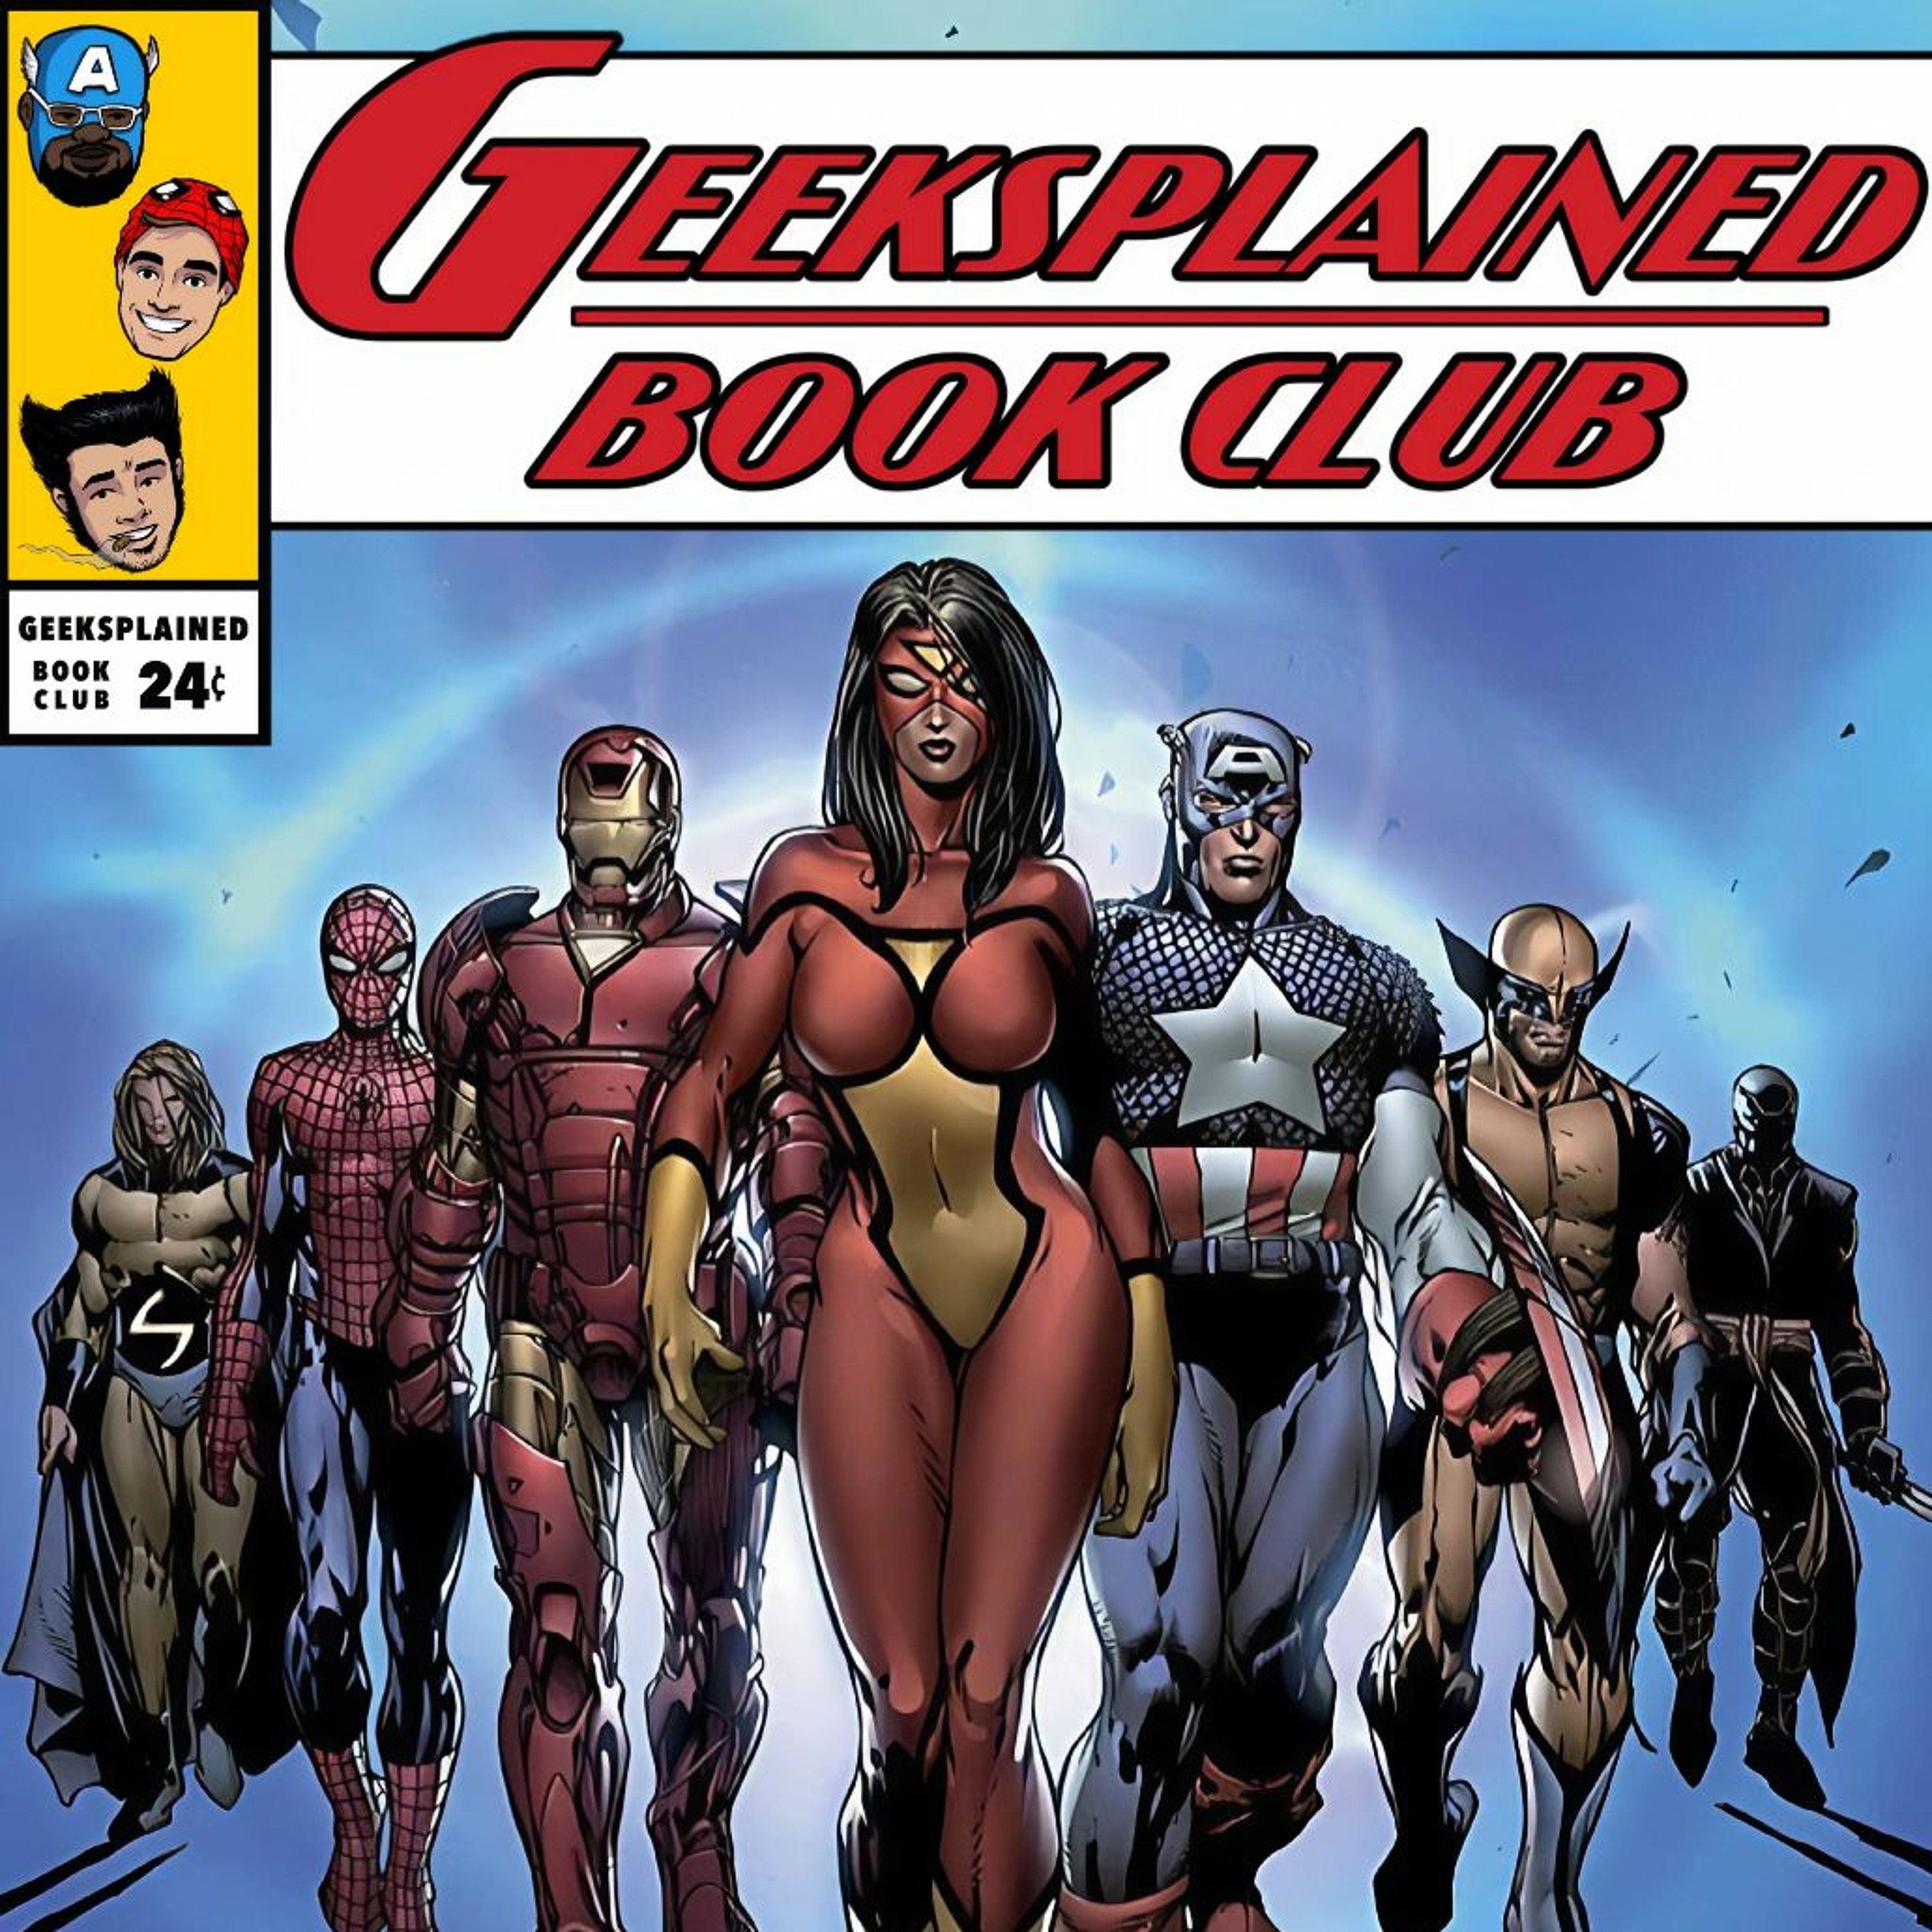 Book Club: Bendis' New Avengers Part 7 (The Collective)